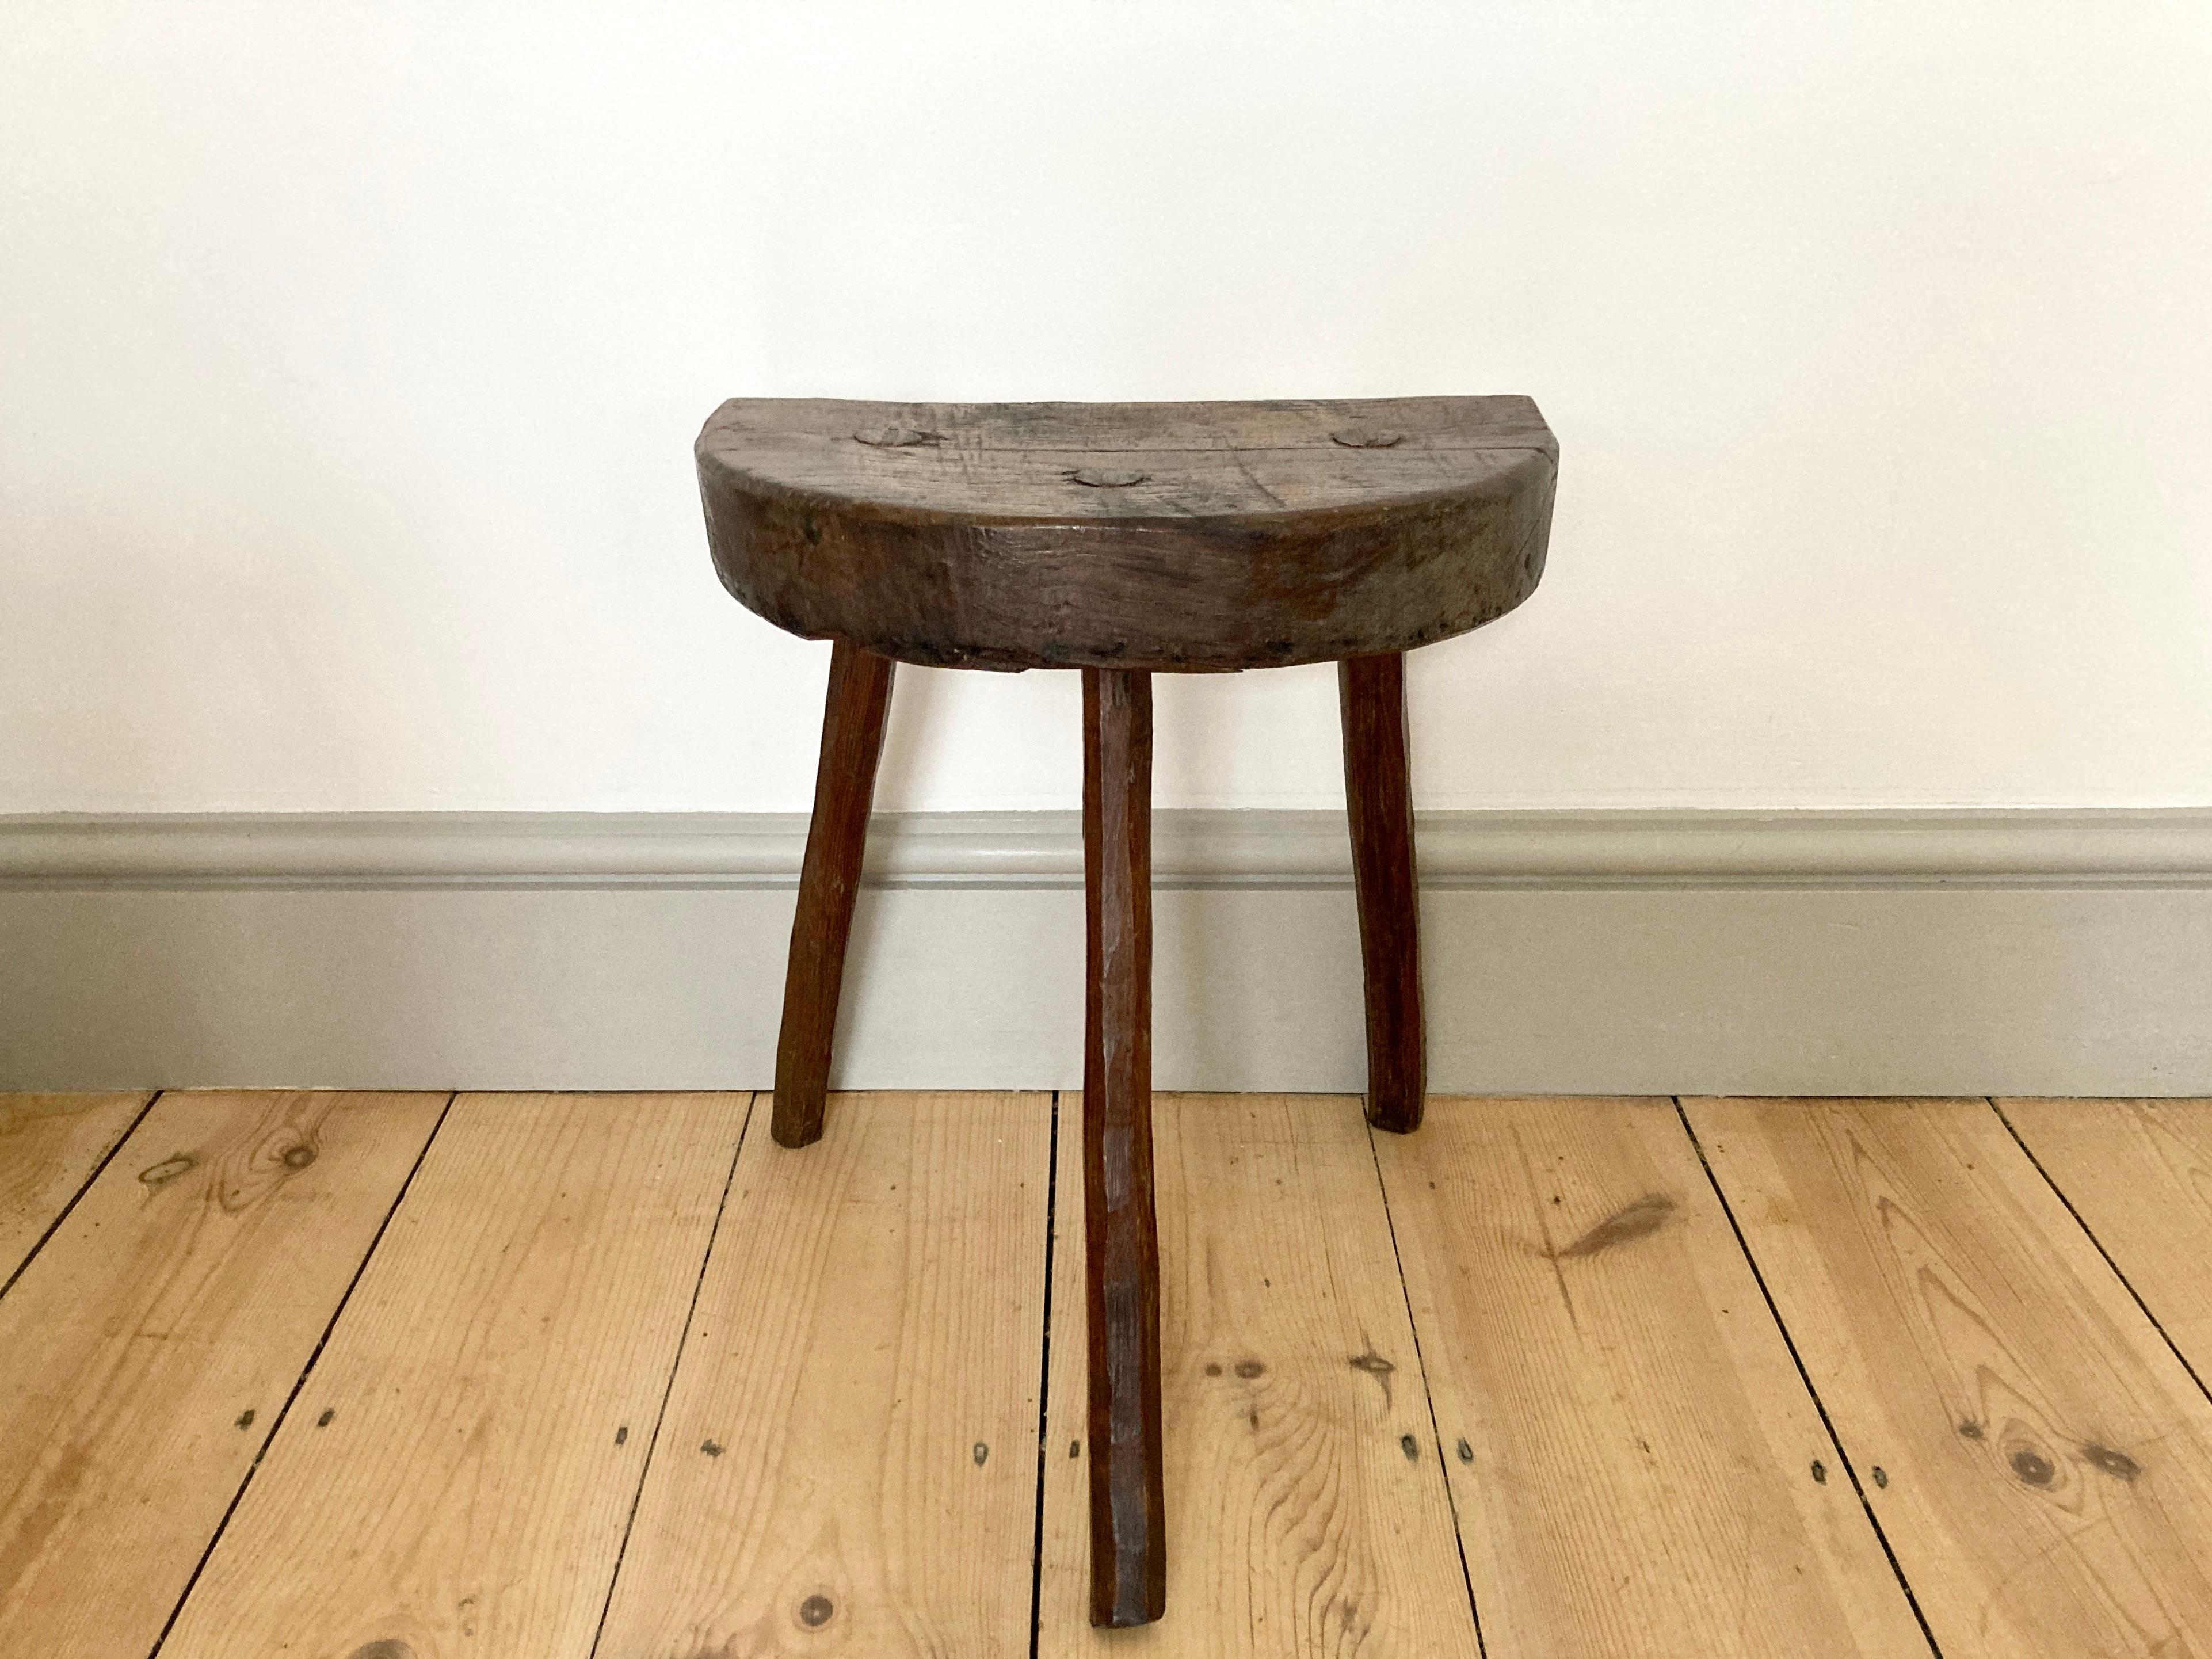 Fabulous antique rustic tripod stool sourced from rural 